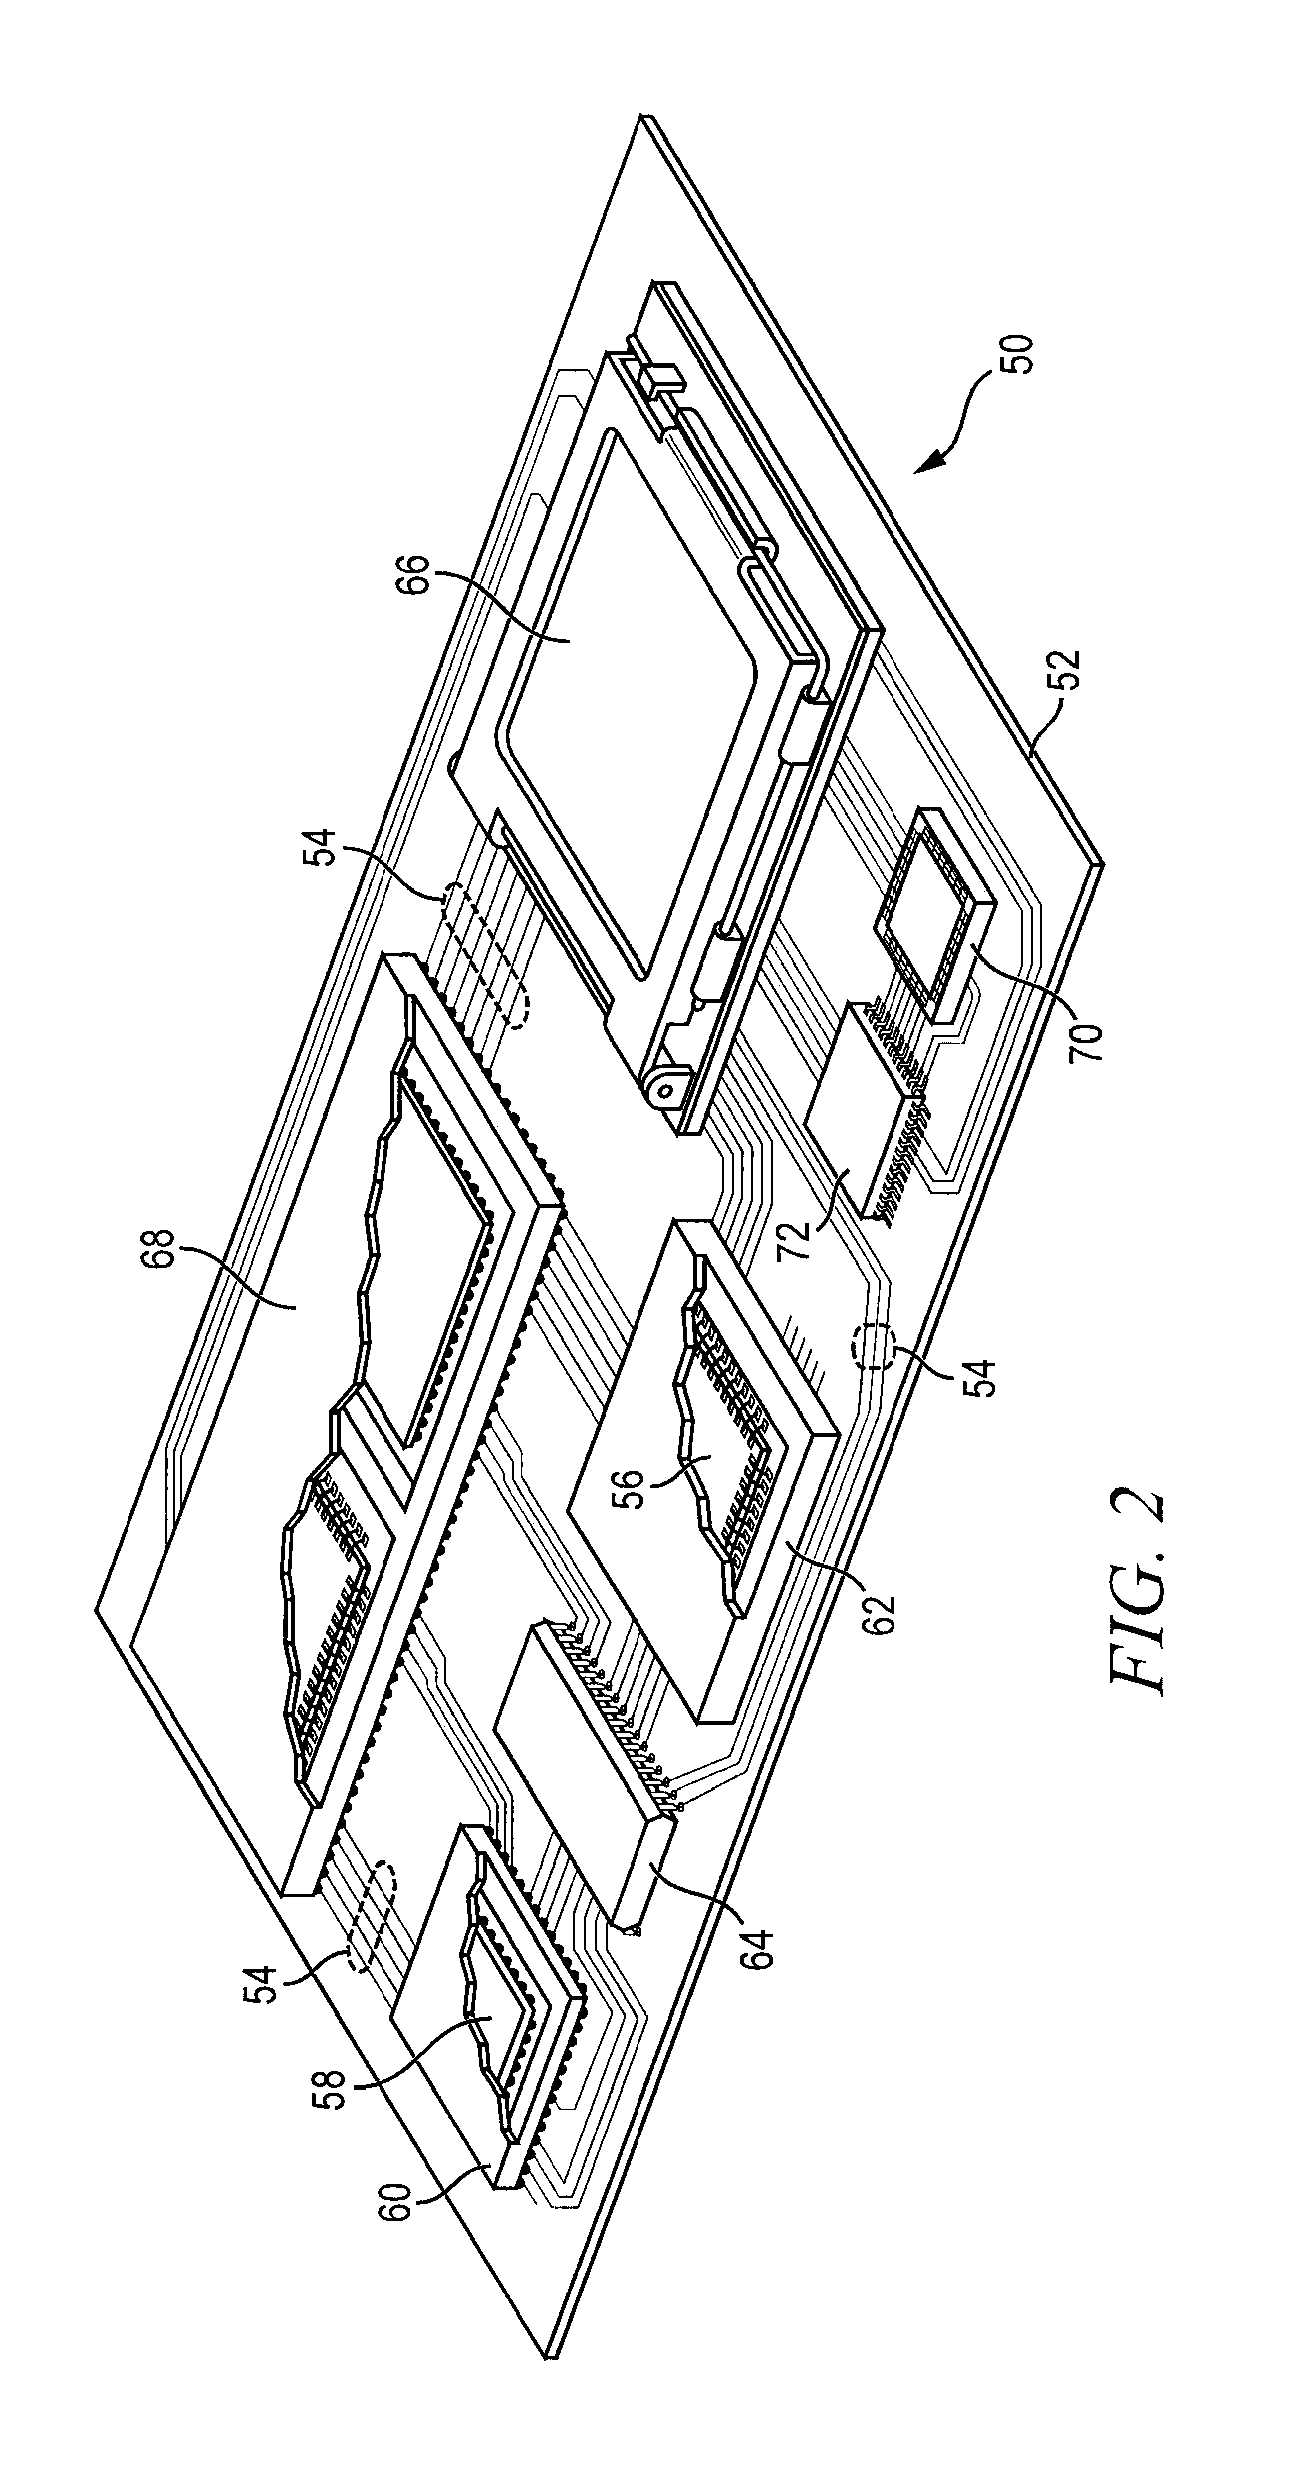 Semiconductor Device and Method of Dissipating Heat From Thin Package-on-Package Mounted to Substrate